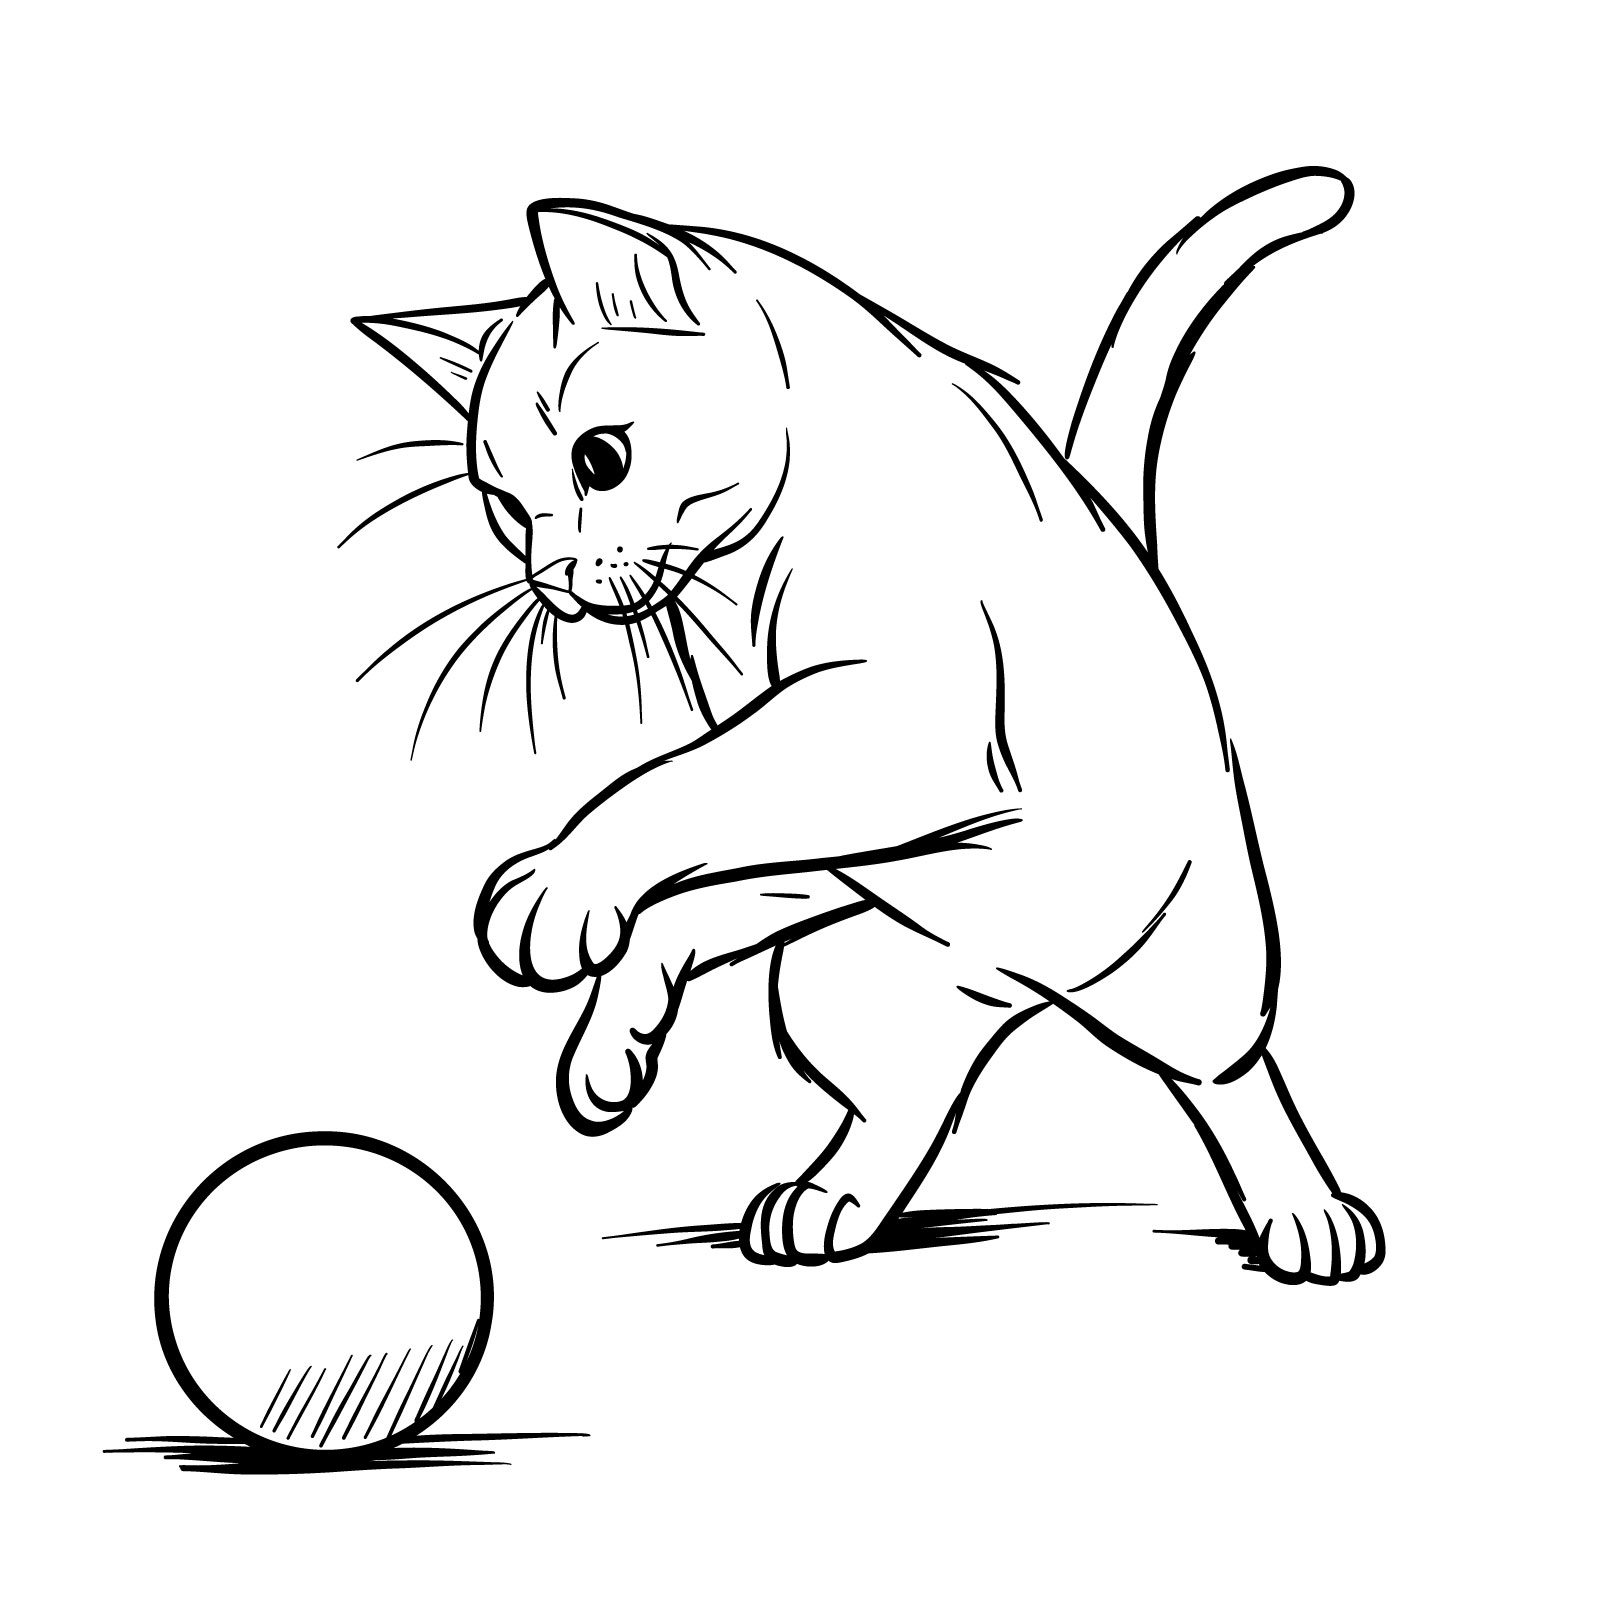 How to Draw a Playing Cat - Easy Step-by-Step Guide